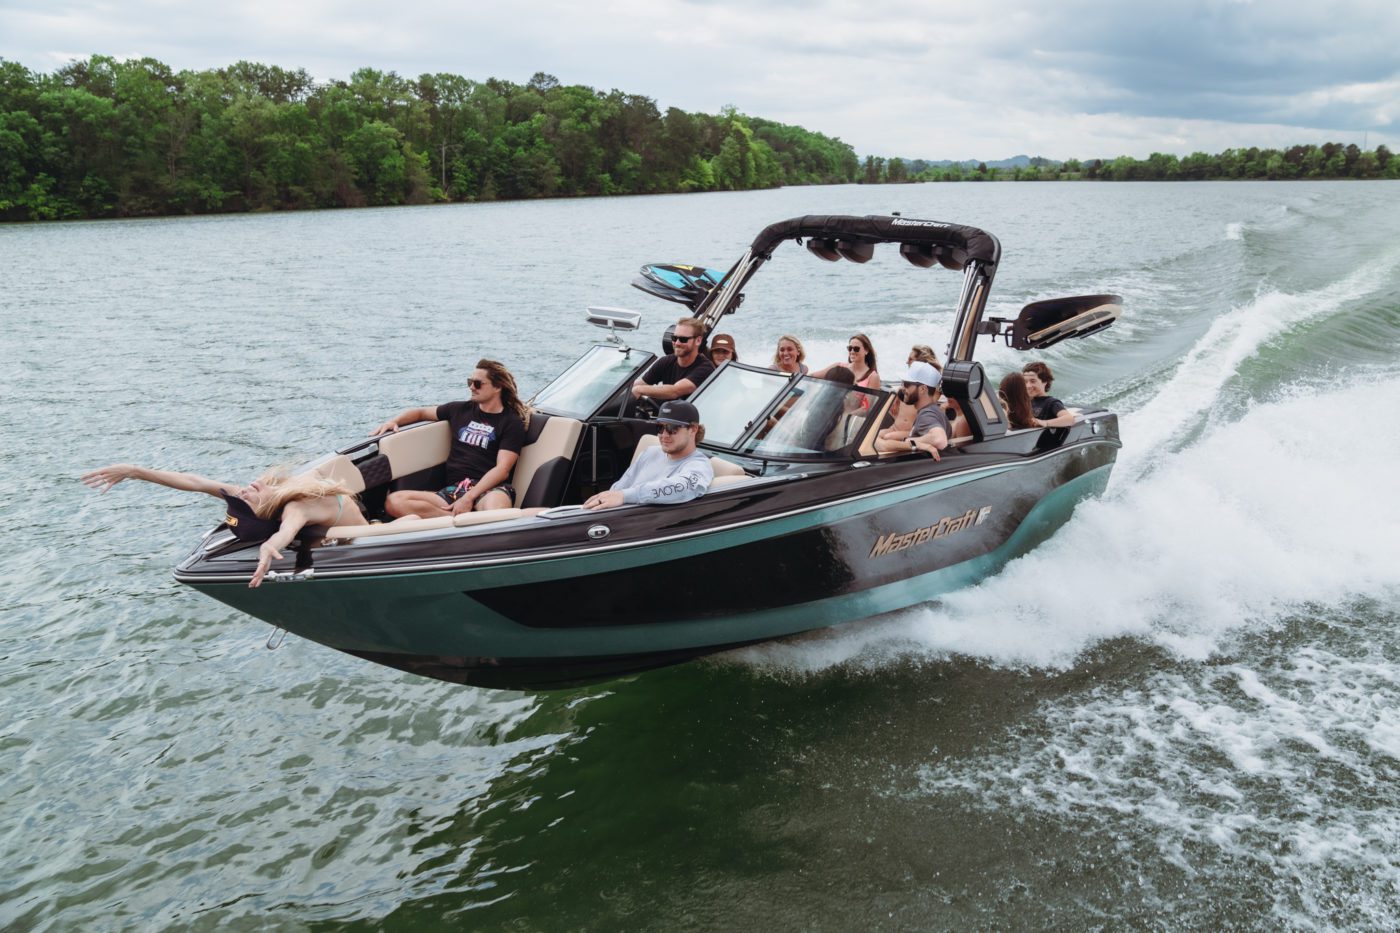 A group of friends in the new MasterCraft XT25.